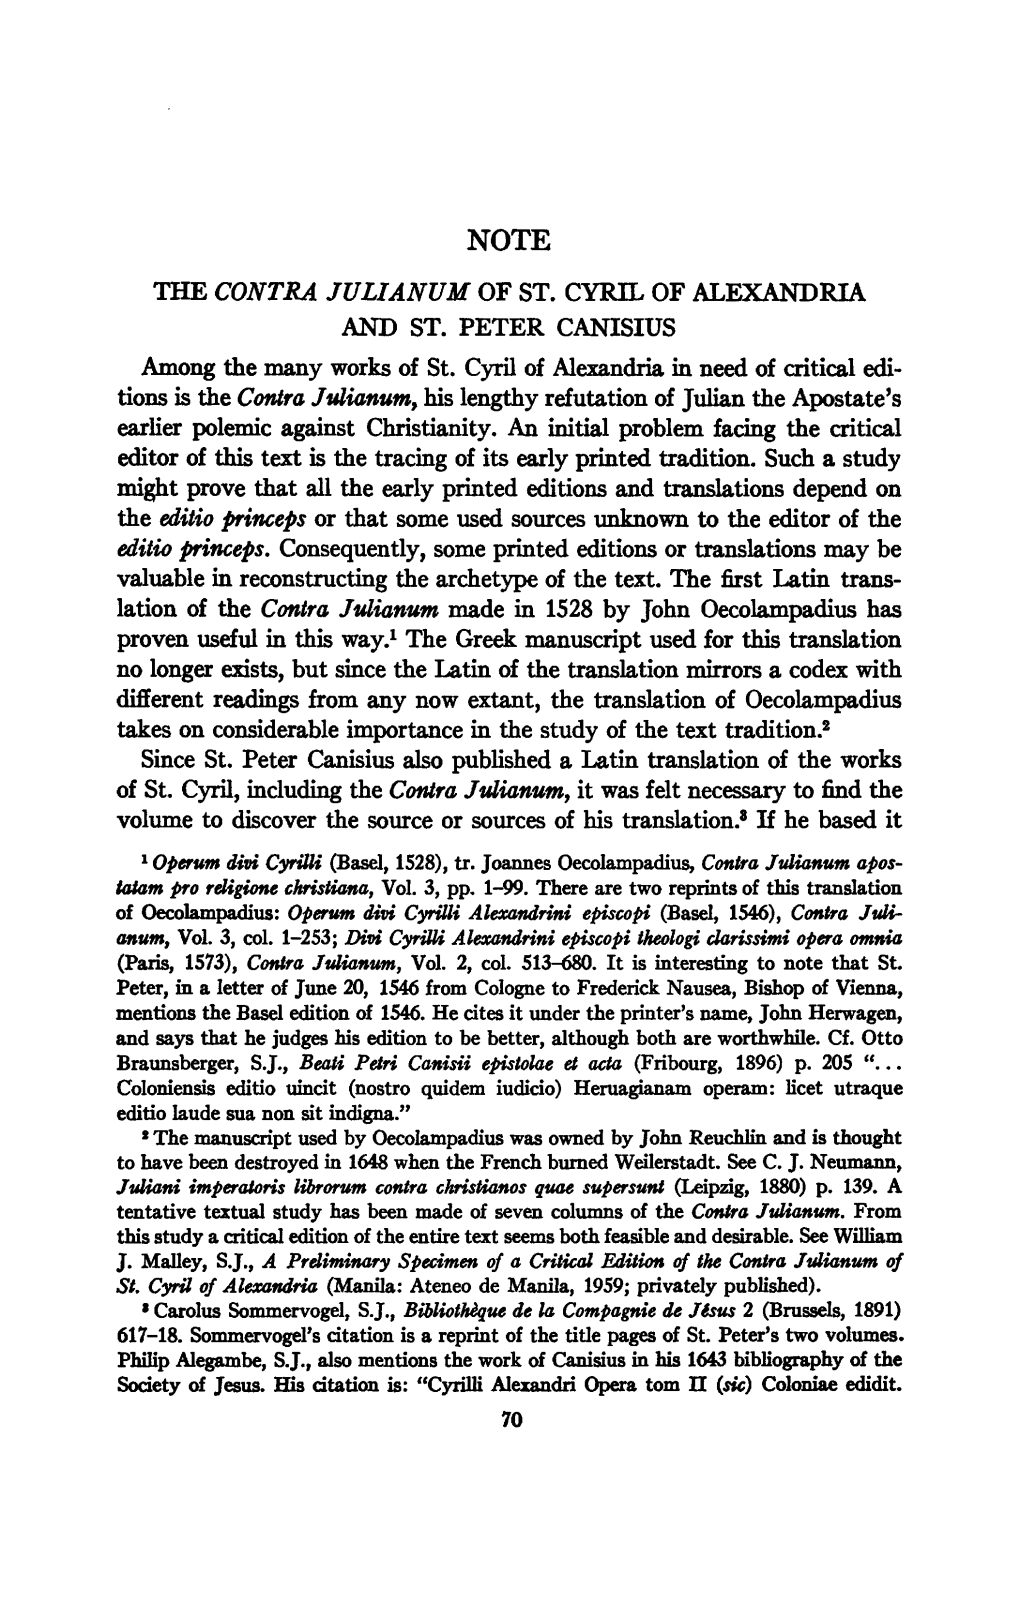 The Contra Julianum of St. Cyril of Alexandria and St